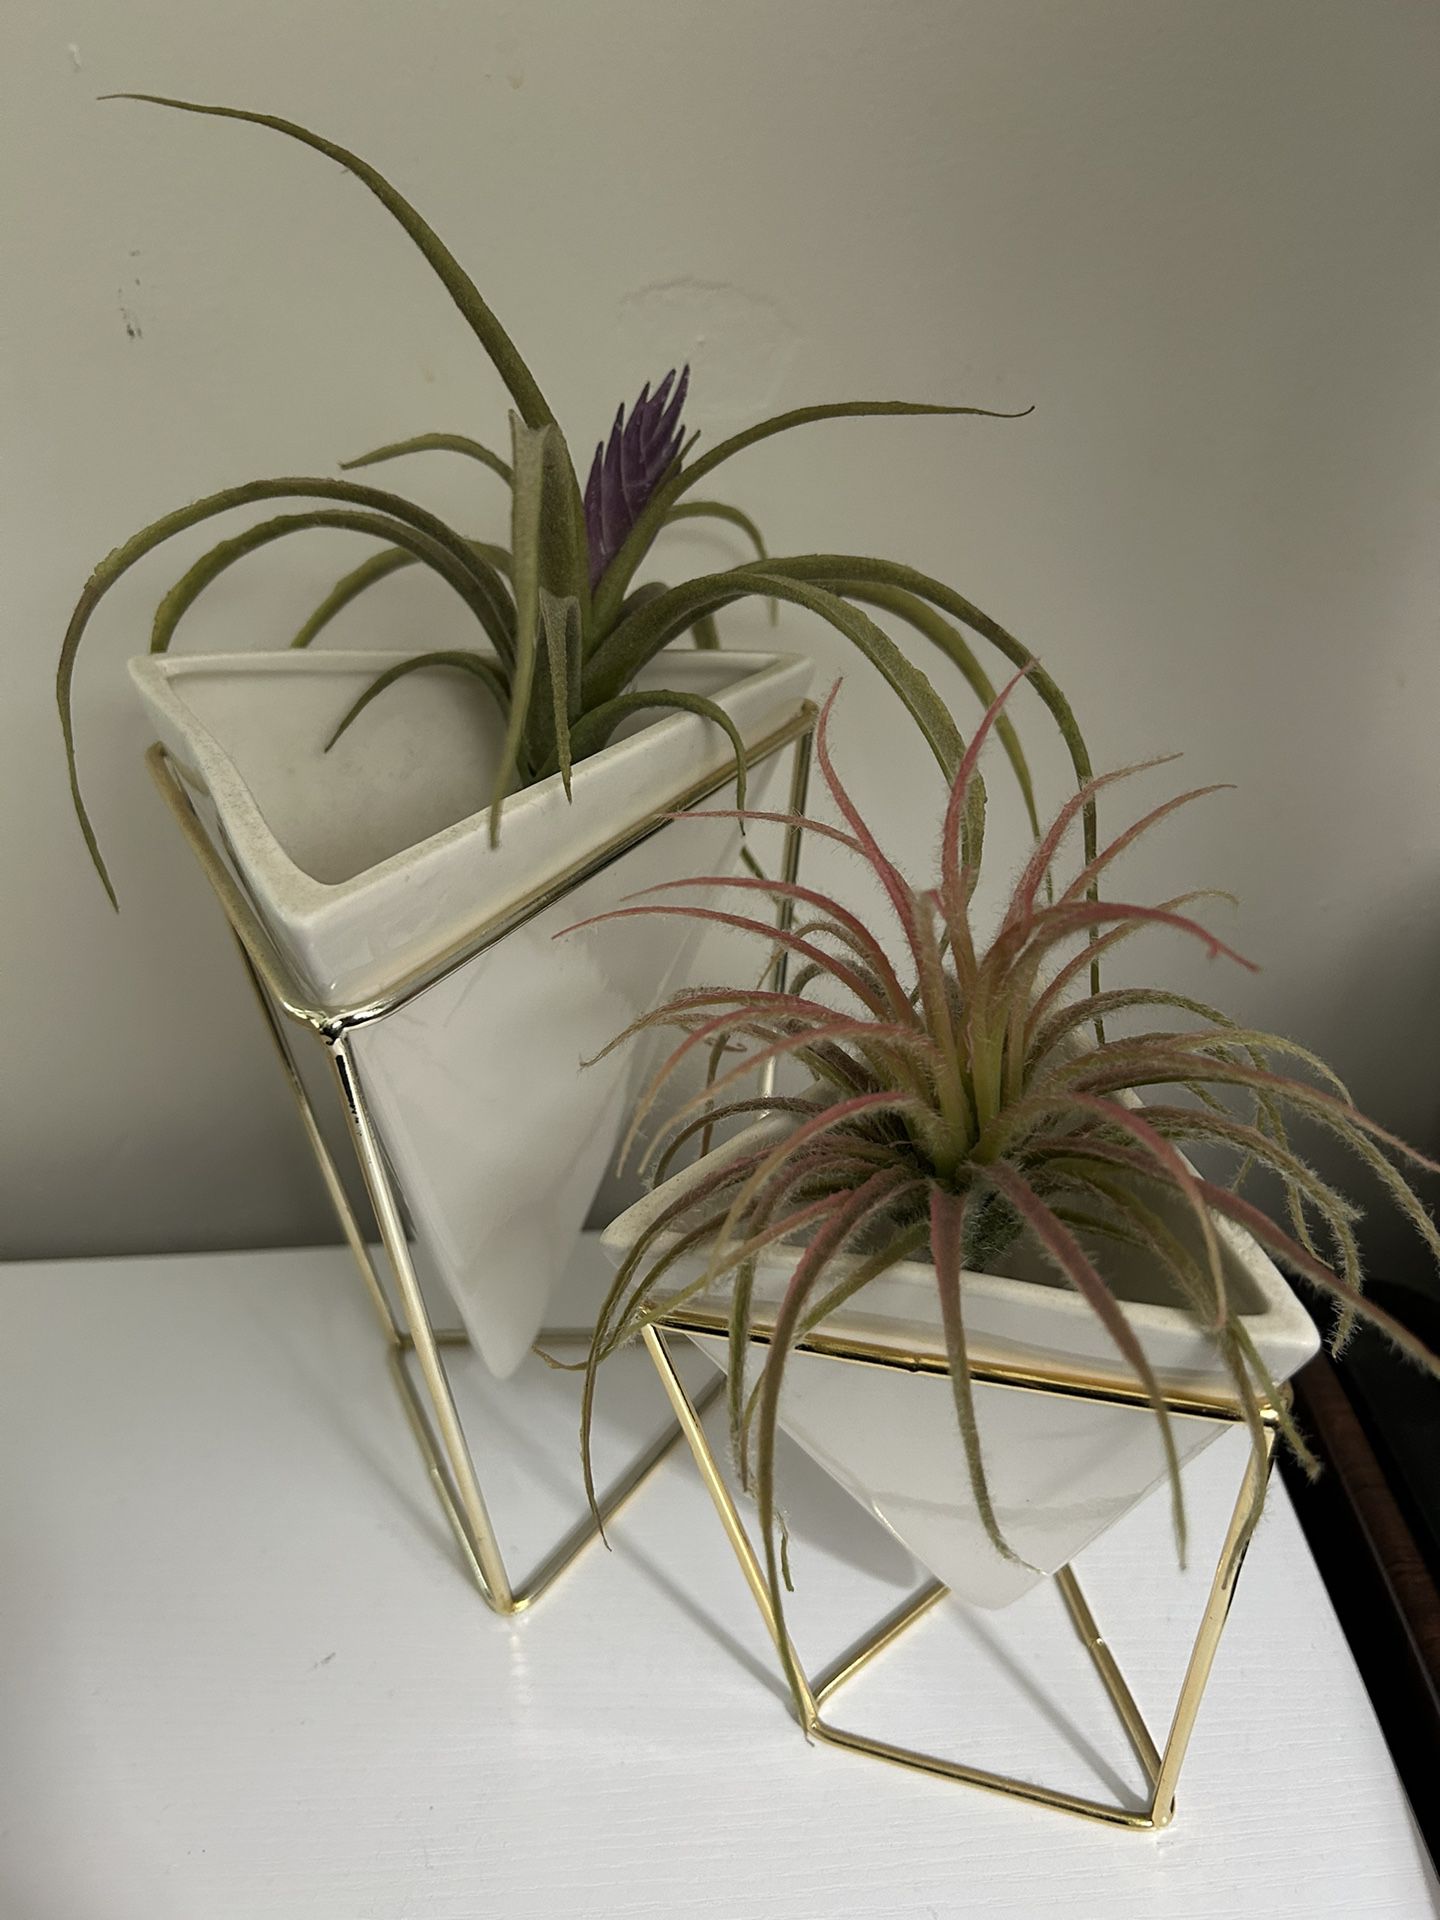 Matching Vases With Fake Air-plants